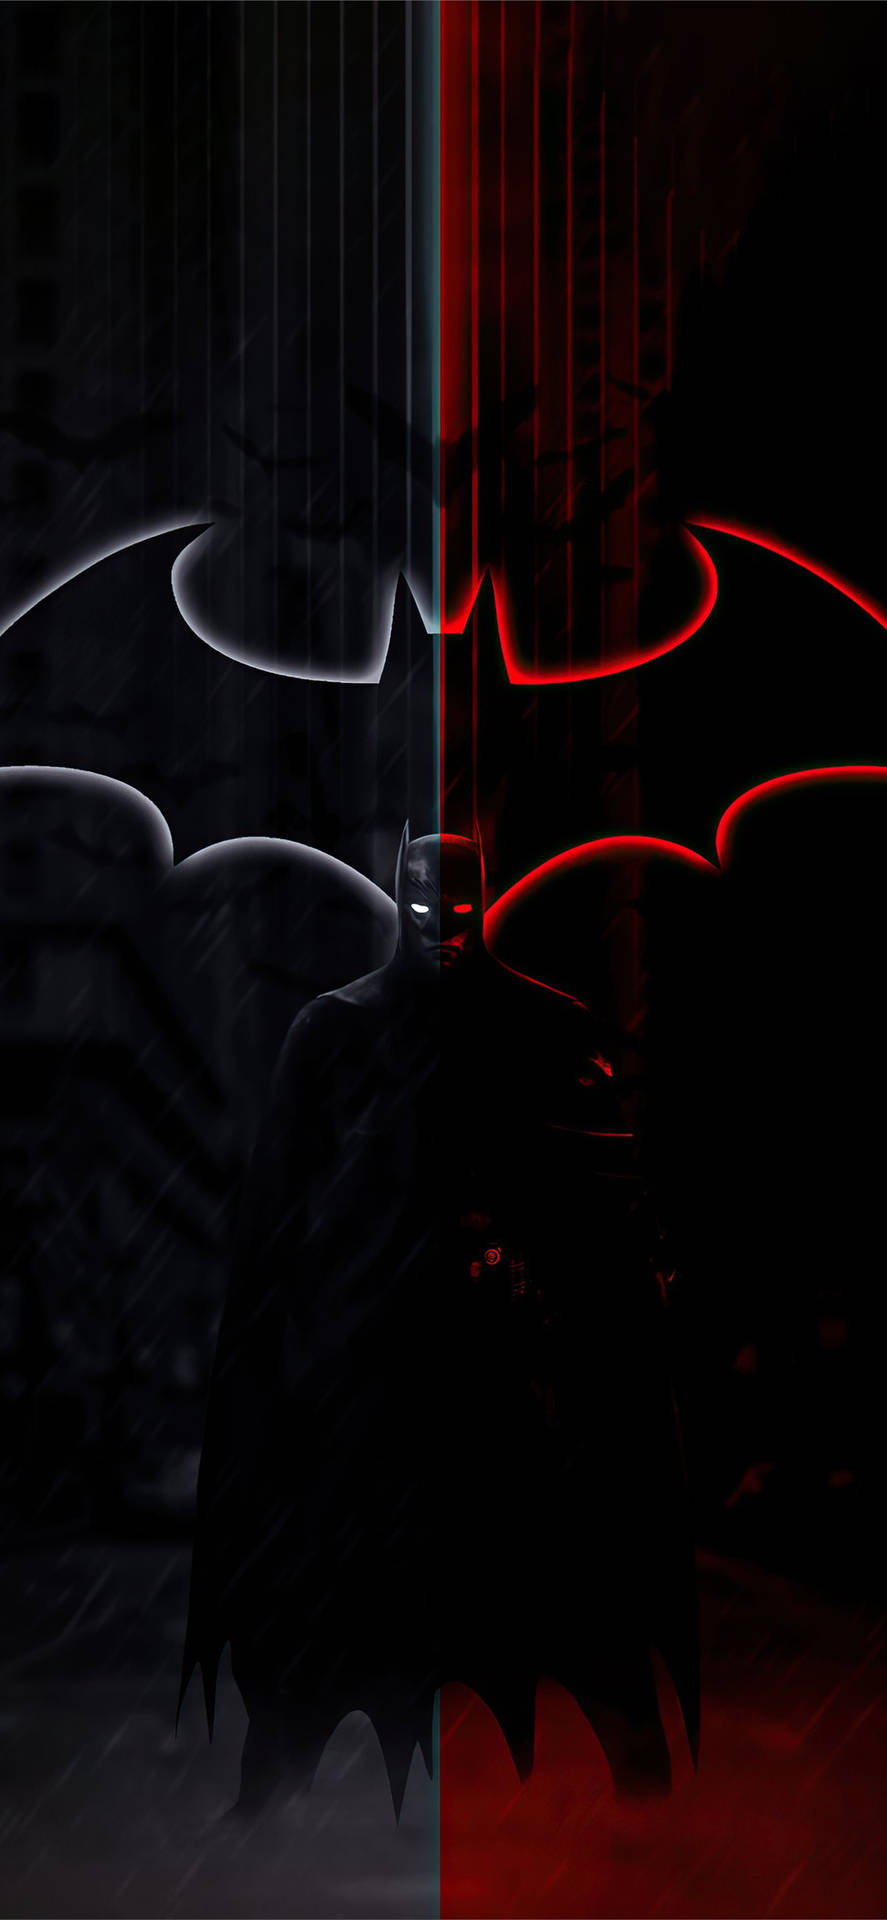 Free The Batman Iphone Background , [100+] The Batman Iphone Background s  for FREE 